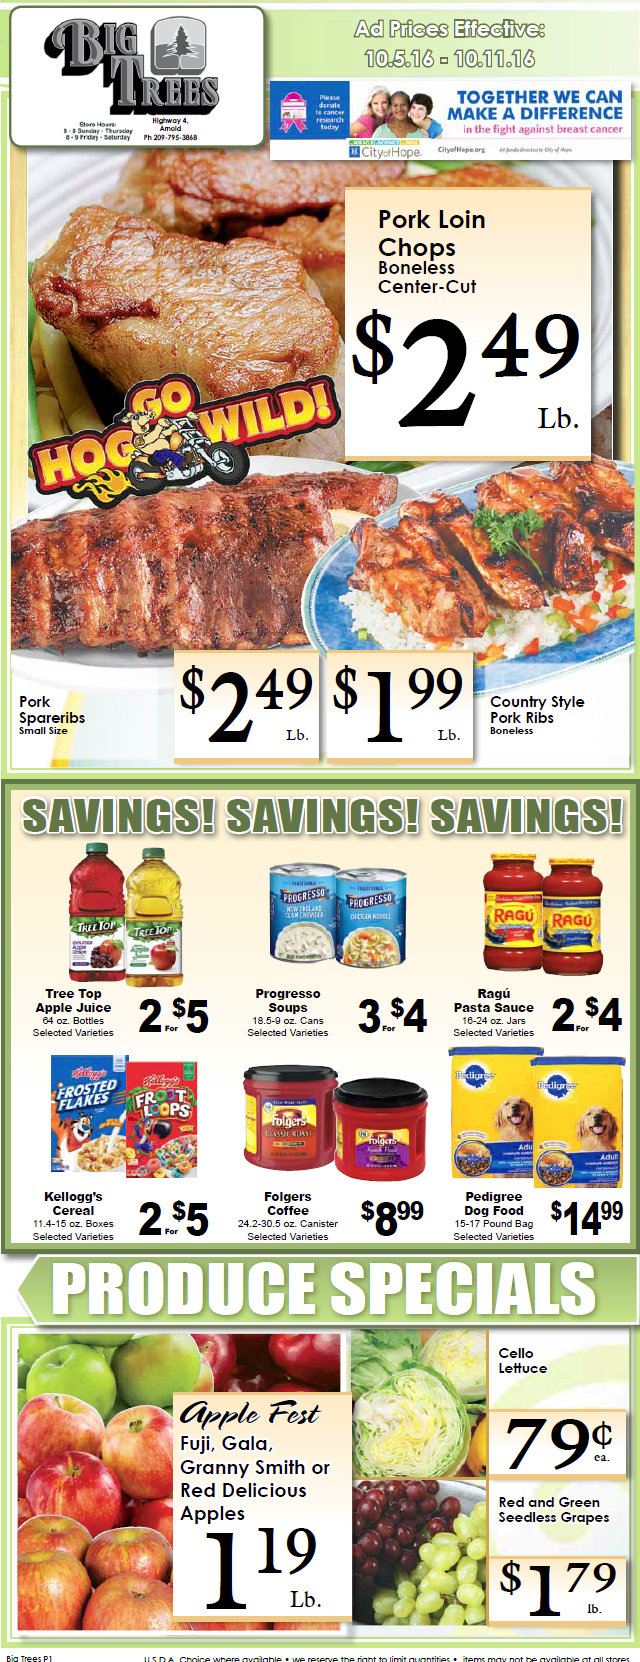 Big Trees Market Weekly Specials & Grocery Ads Through October 11th